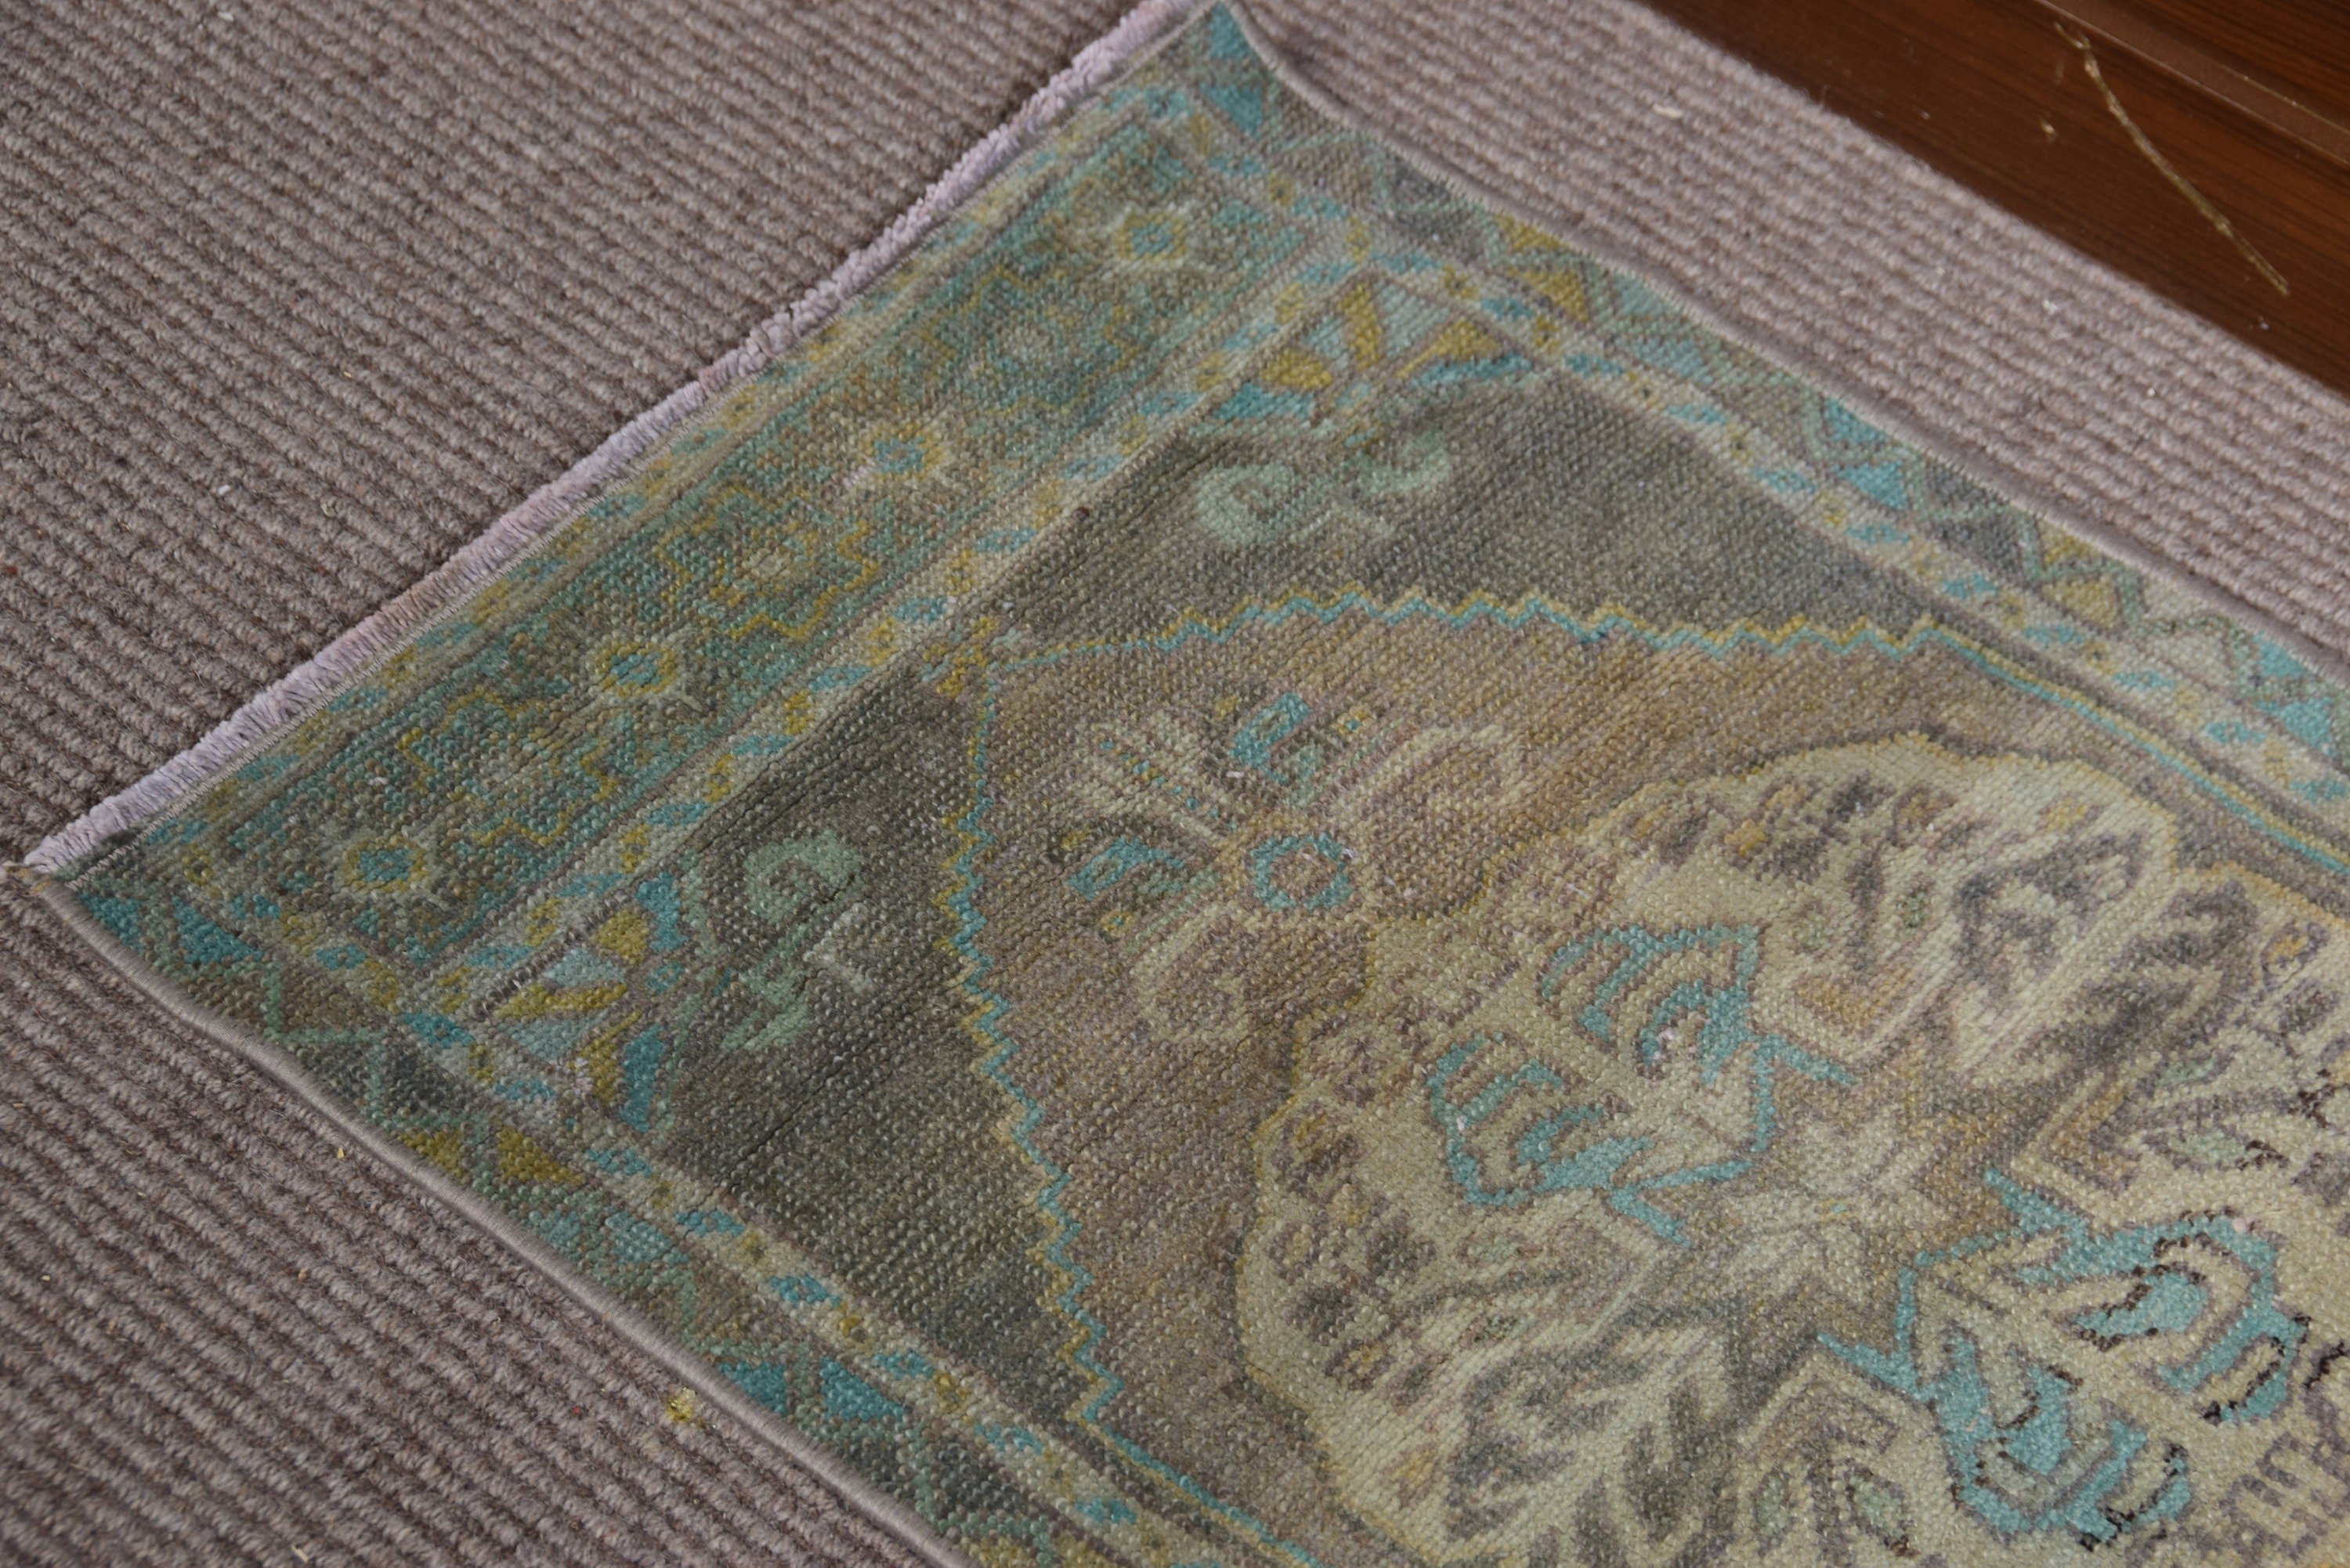 Car Mat Rug, Bedroom Rug, Vintage Rugs, Oushak Rug, Home Decor Rug, Green Oushak Rugs, Rugs for Entry, Turkish Rug, 1.5x2.7 ft Small Rugs